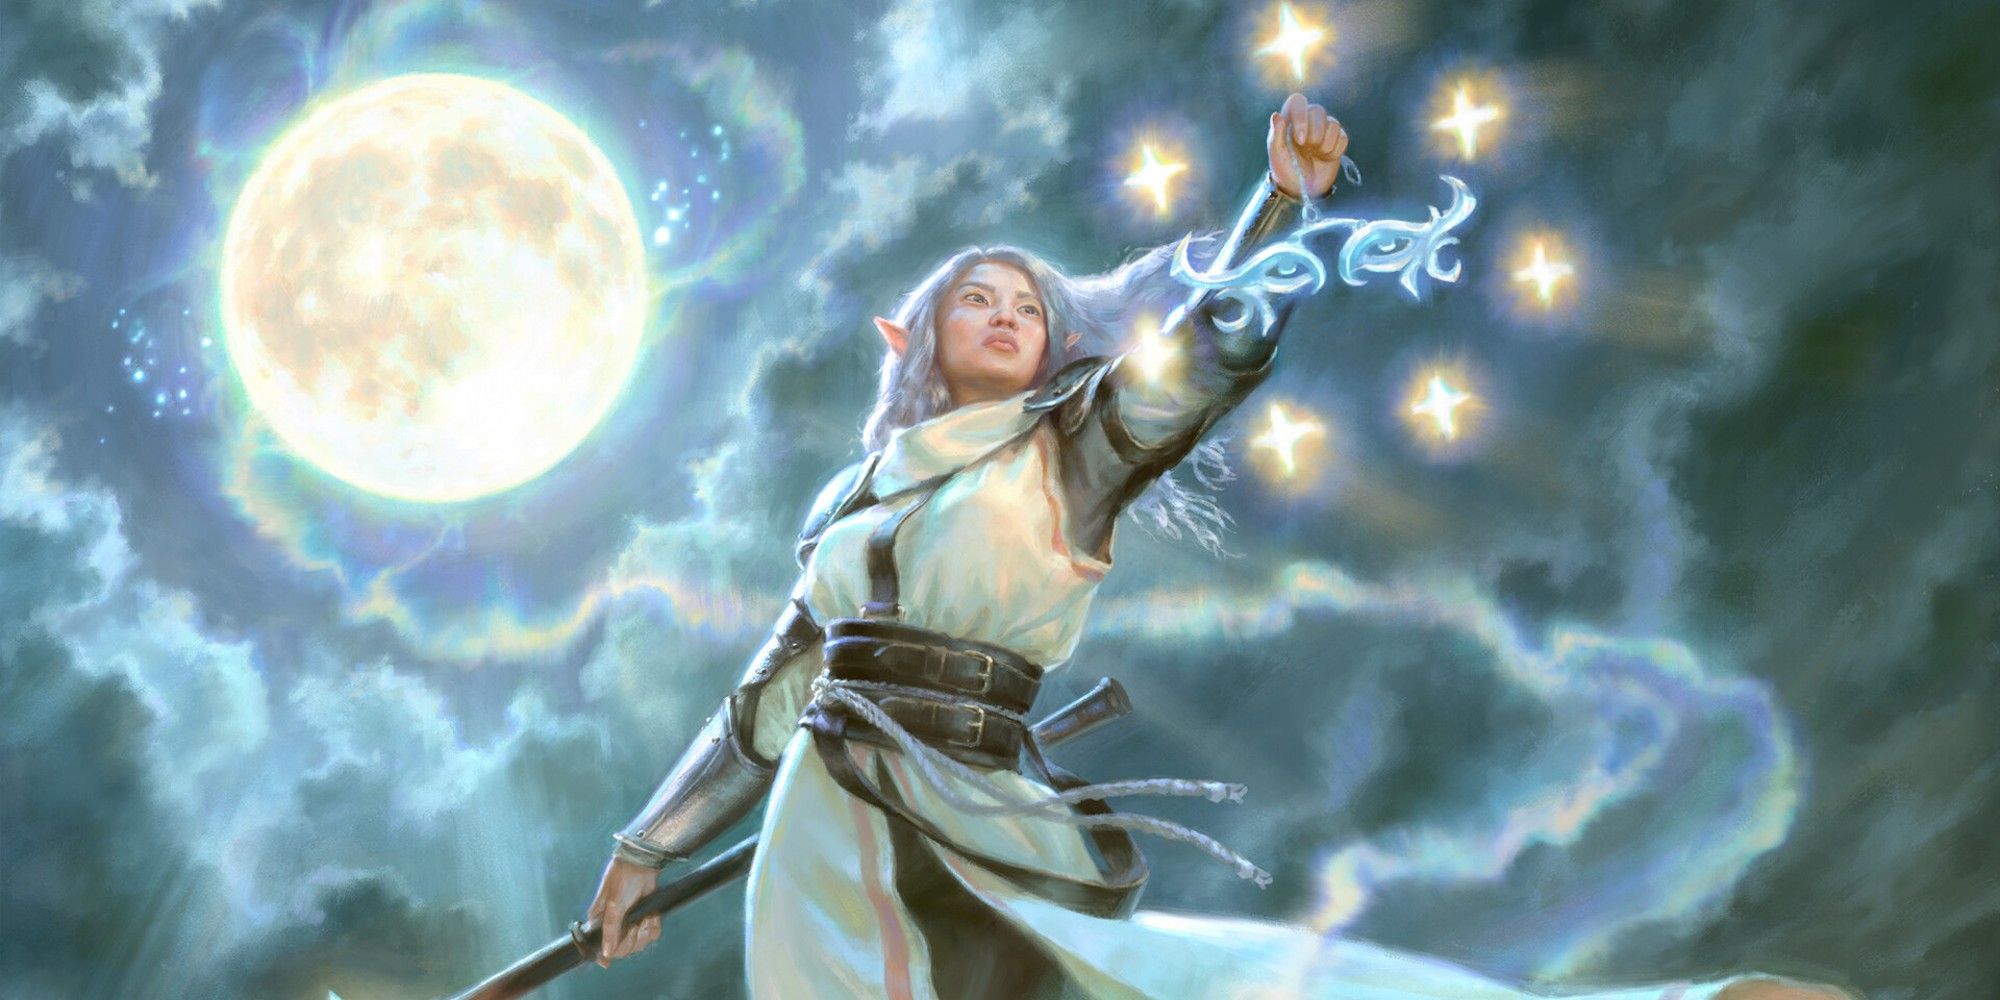 Dungeons & Dragons Cleric With Full Moon Behind